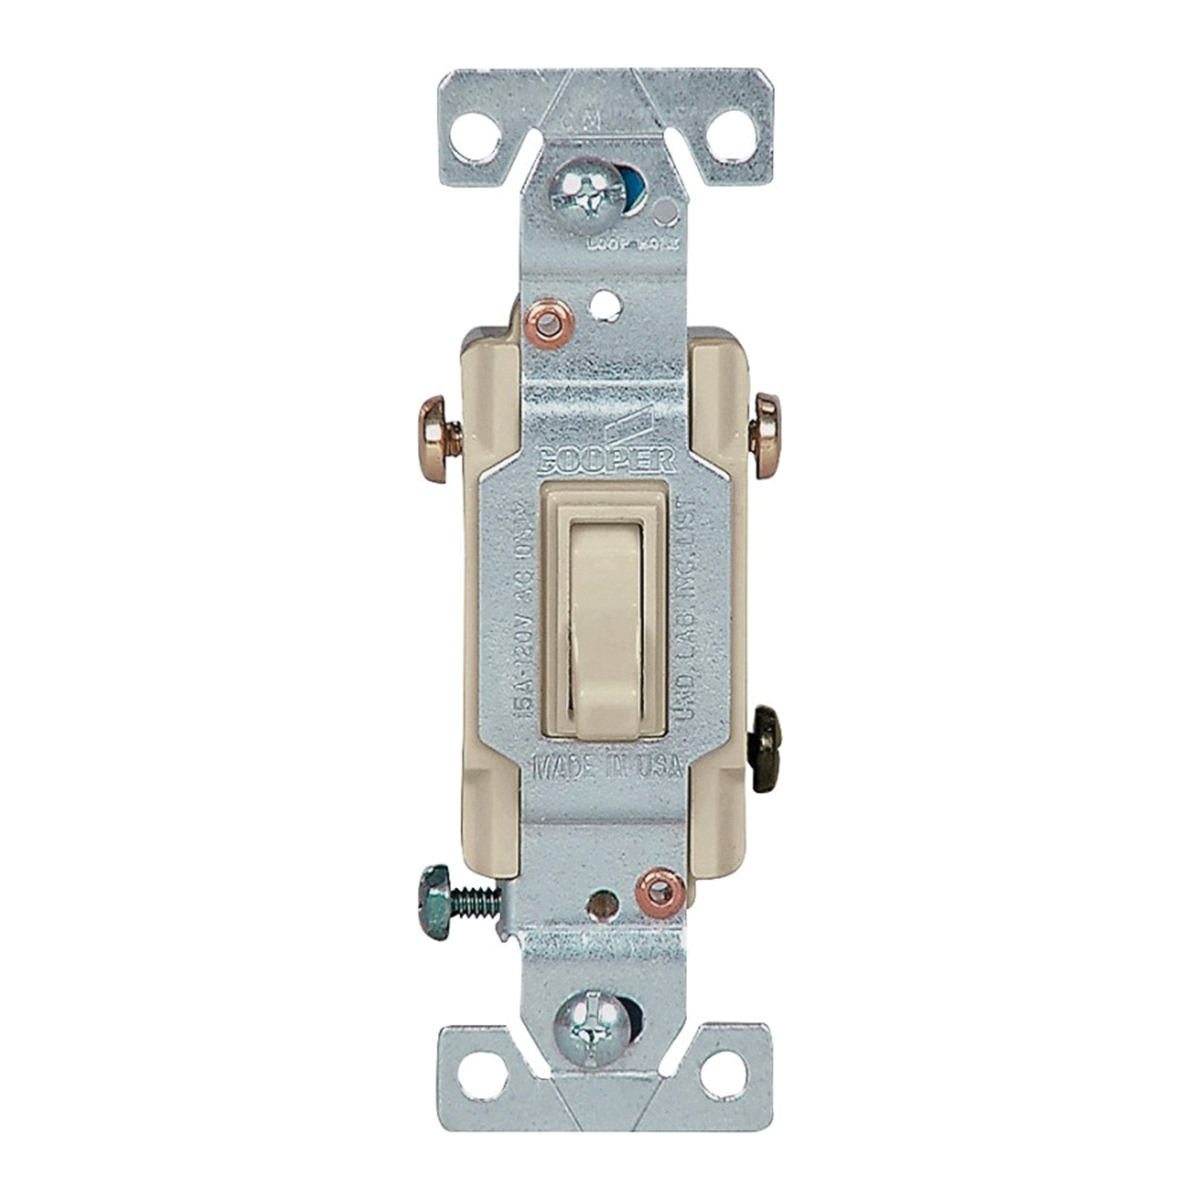 1303-7V-10-L Toggle Switch, 15 A, 120 V, 3-Position, Push-In Terminal, Polycarbonate Housing Material, Ivory